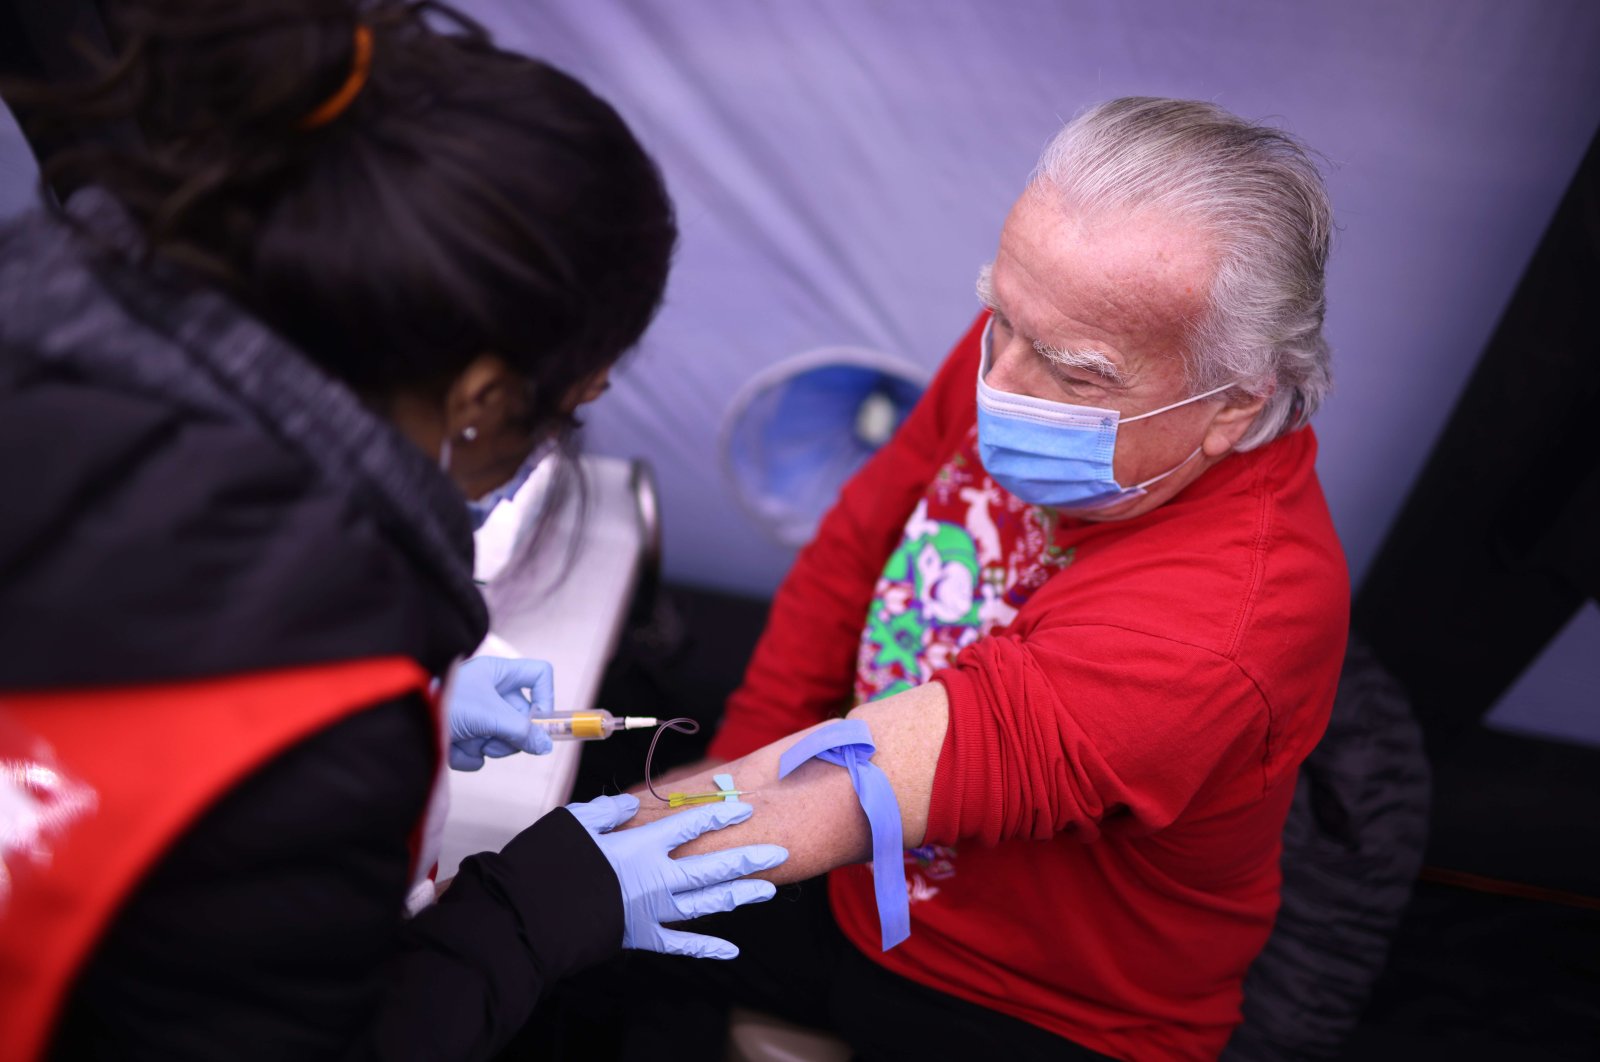 Bill Matusiha gets blood drawn by phlebotomist Randa Ali for a Covid-19 antibody test at a mobile test site being run by Roseland Community Hospital on December 12, 2020 in Chicago, Illinois. (Getty Images/AFP Photo)
